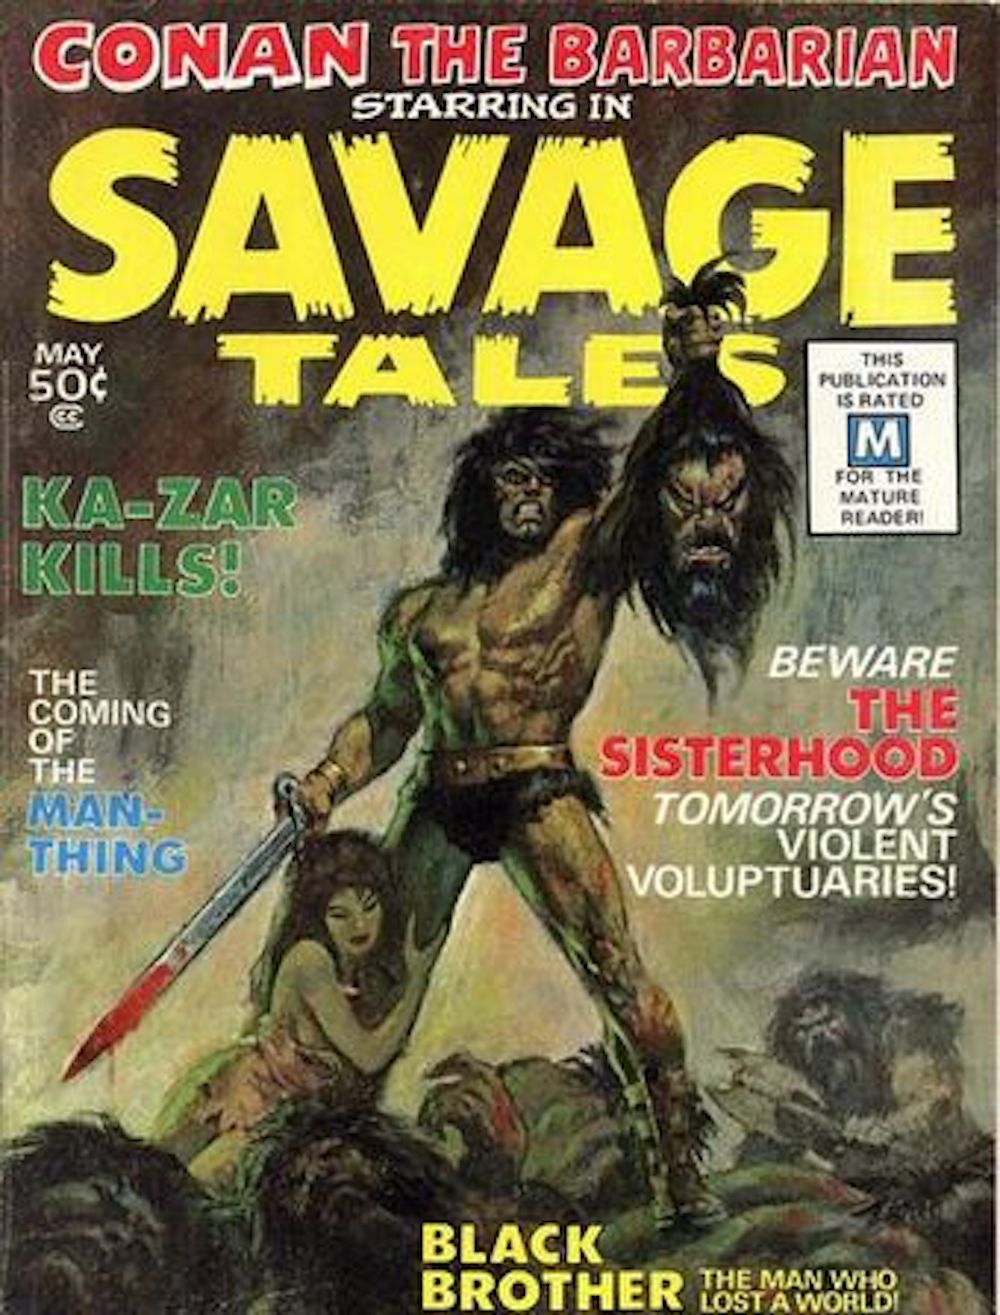 Savage Tales featuring the Man Thing